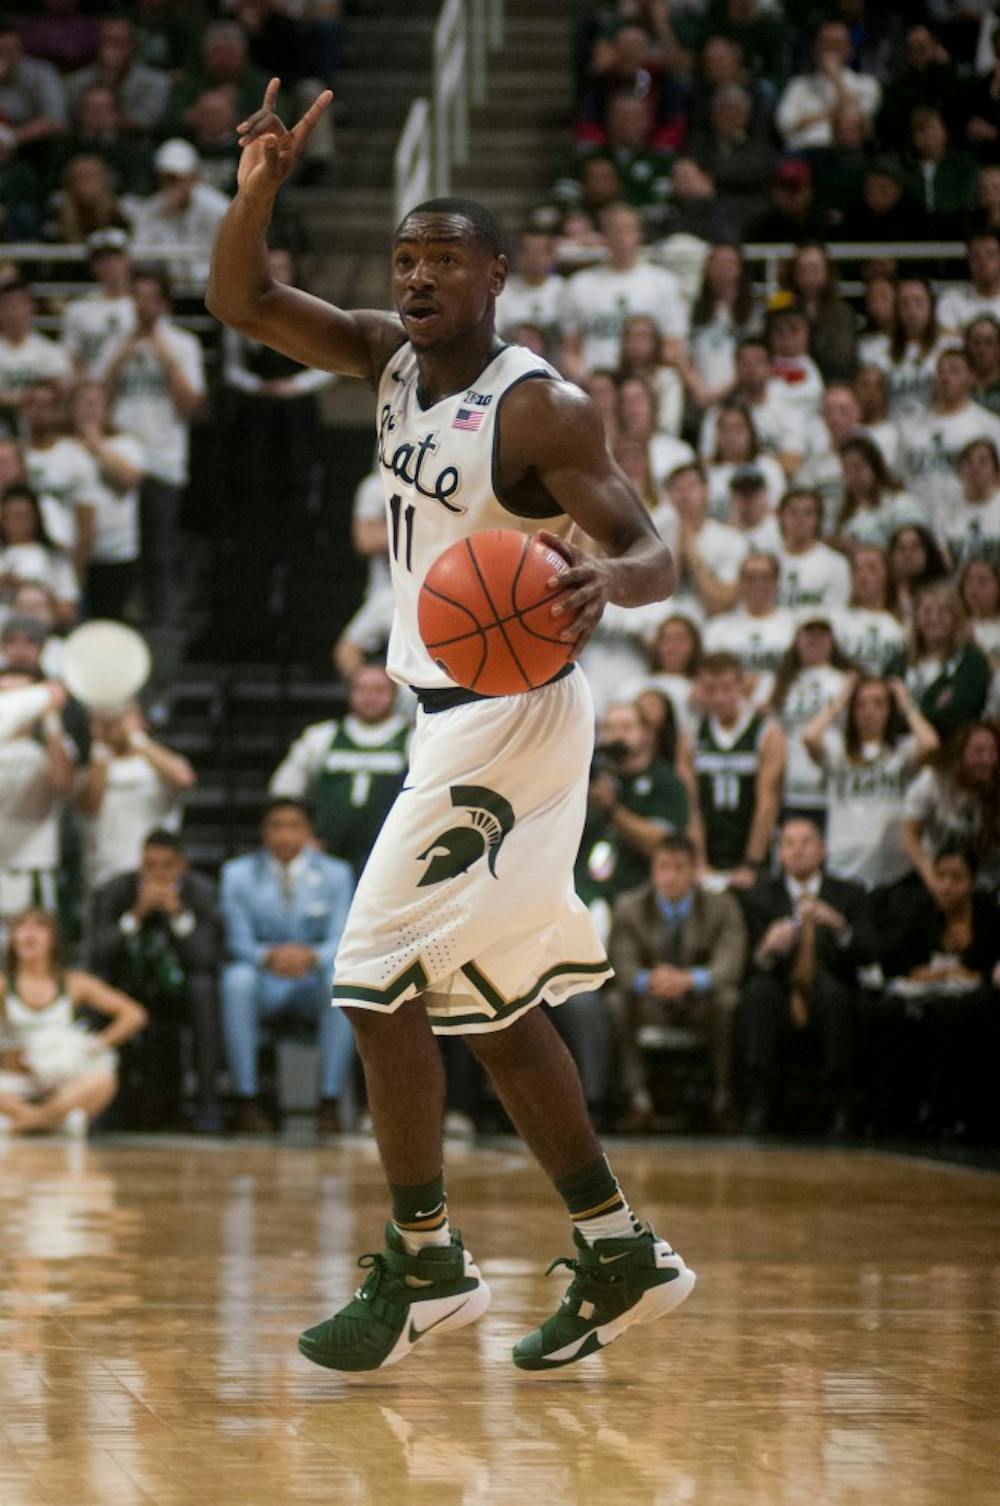 Lourawls 'Tum Tum' Nairn Jr., 11, calls a play during the first half of the basketball game against the University of Louisville on Dec. 2, 2015 at the Breslin Center in East Lansing, MI. The Spartans defeated the Cardinals, 71-67.